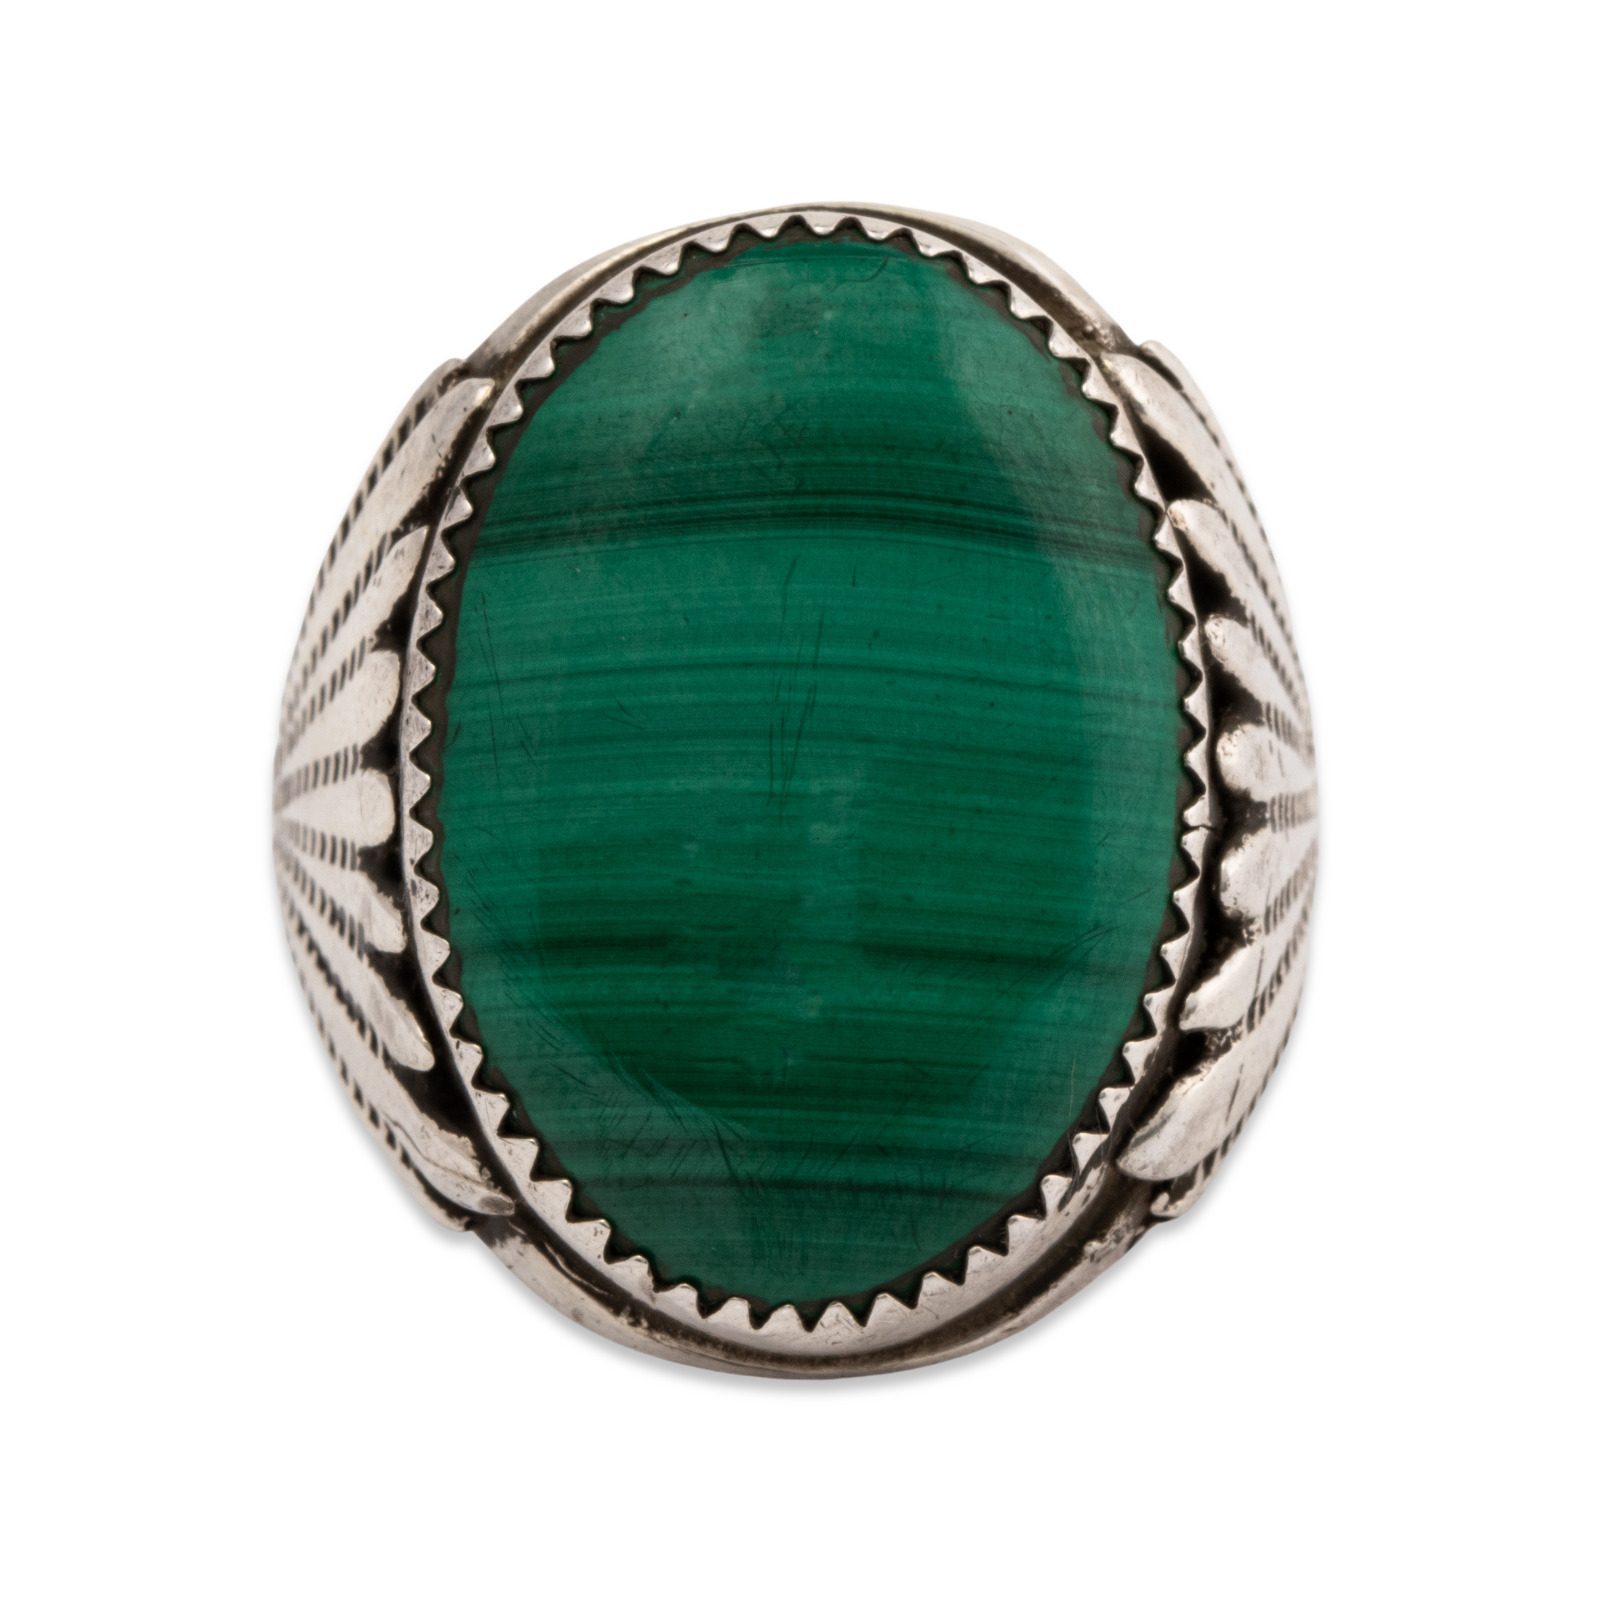 LARGE NATIVE AMERICAN STERLING SILVER MALACHITE APPLIED RING 10.25